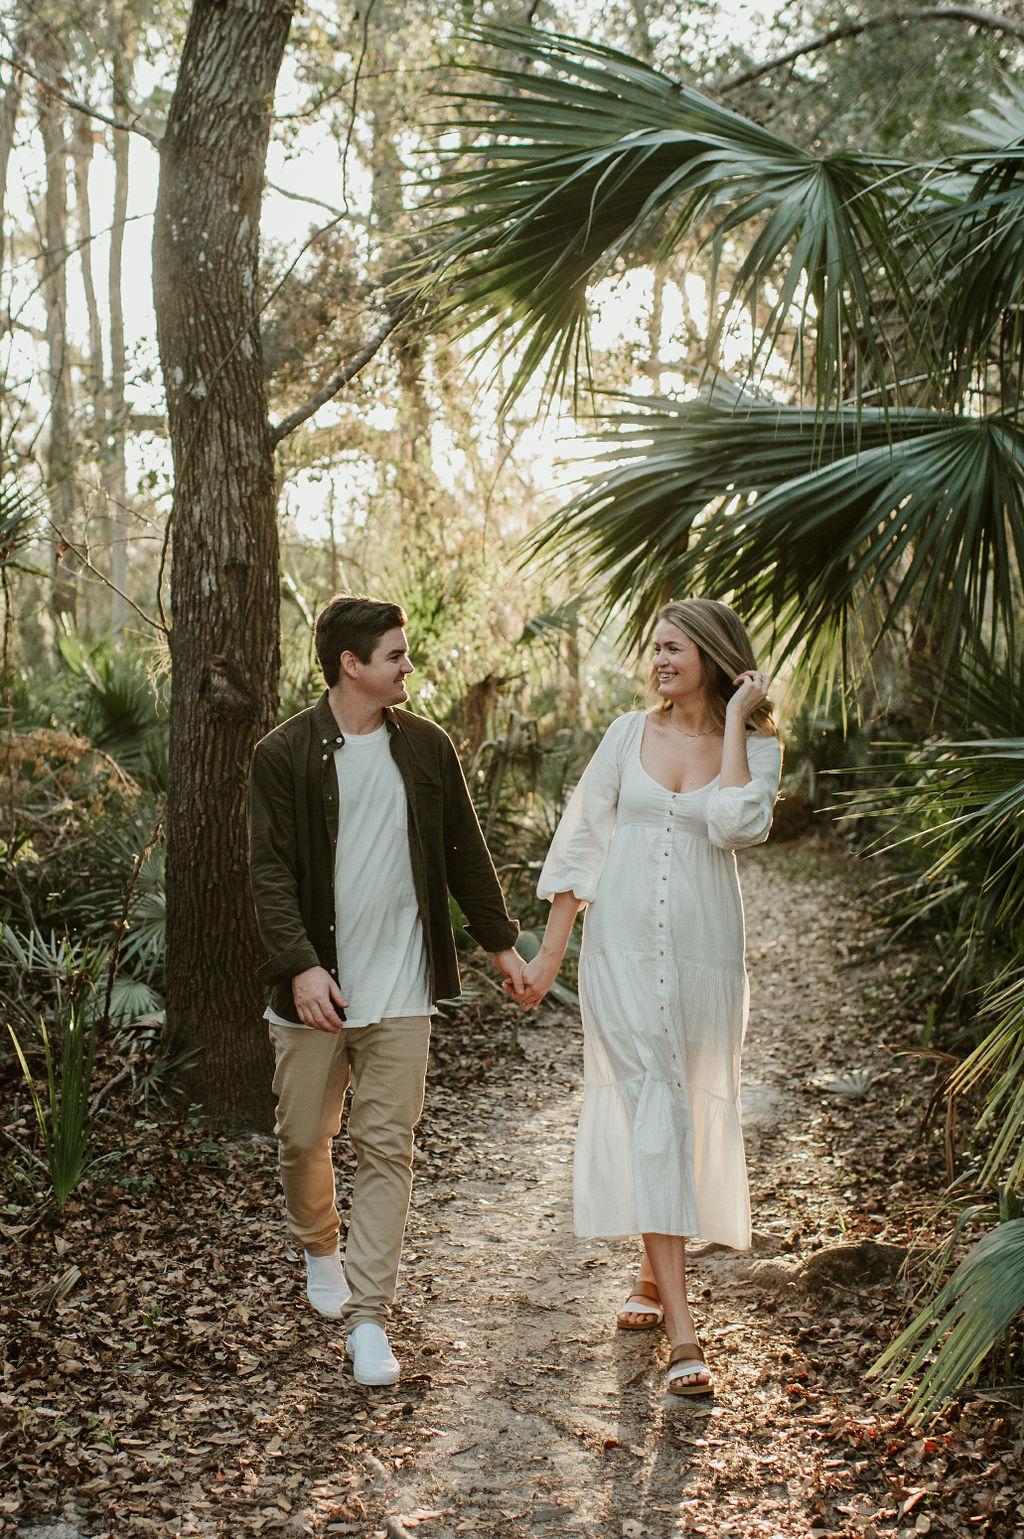 The Wedding Website of Courtney Brown and Connor Askew